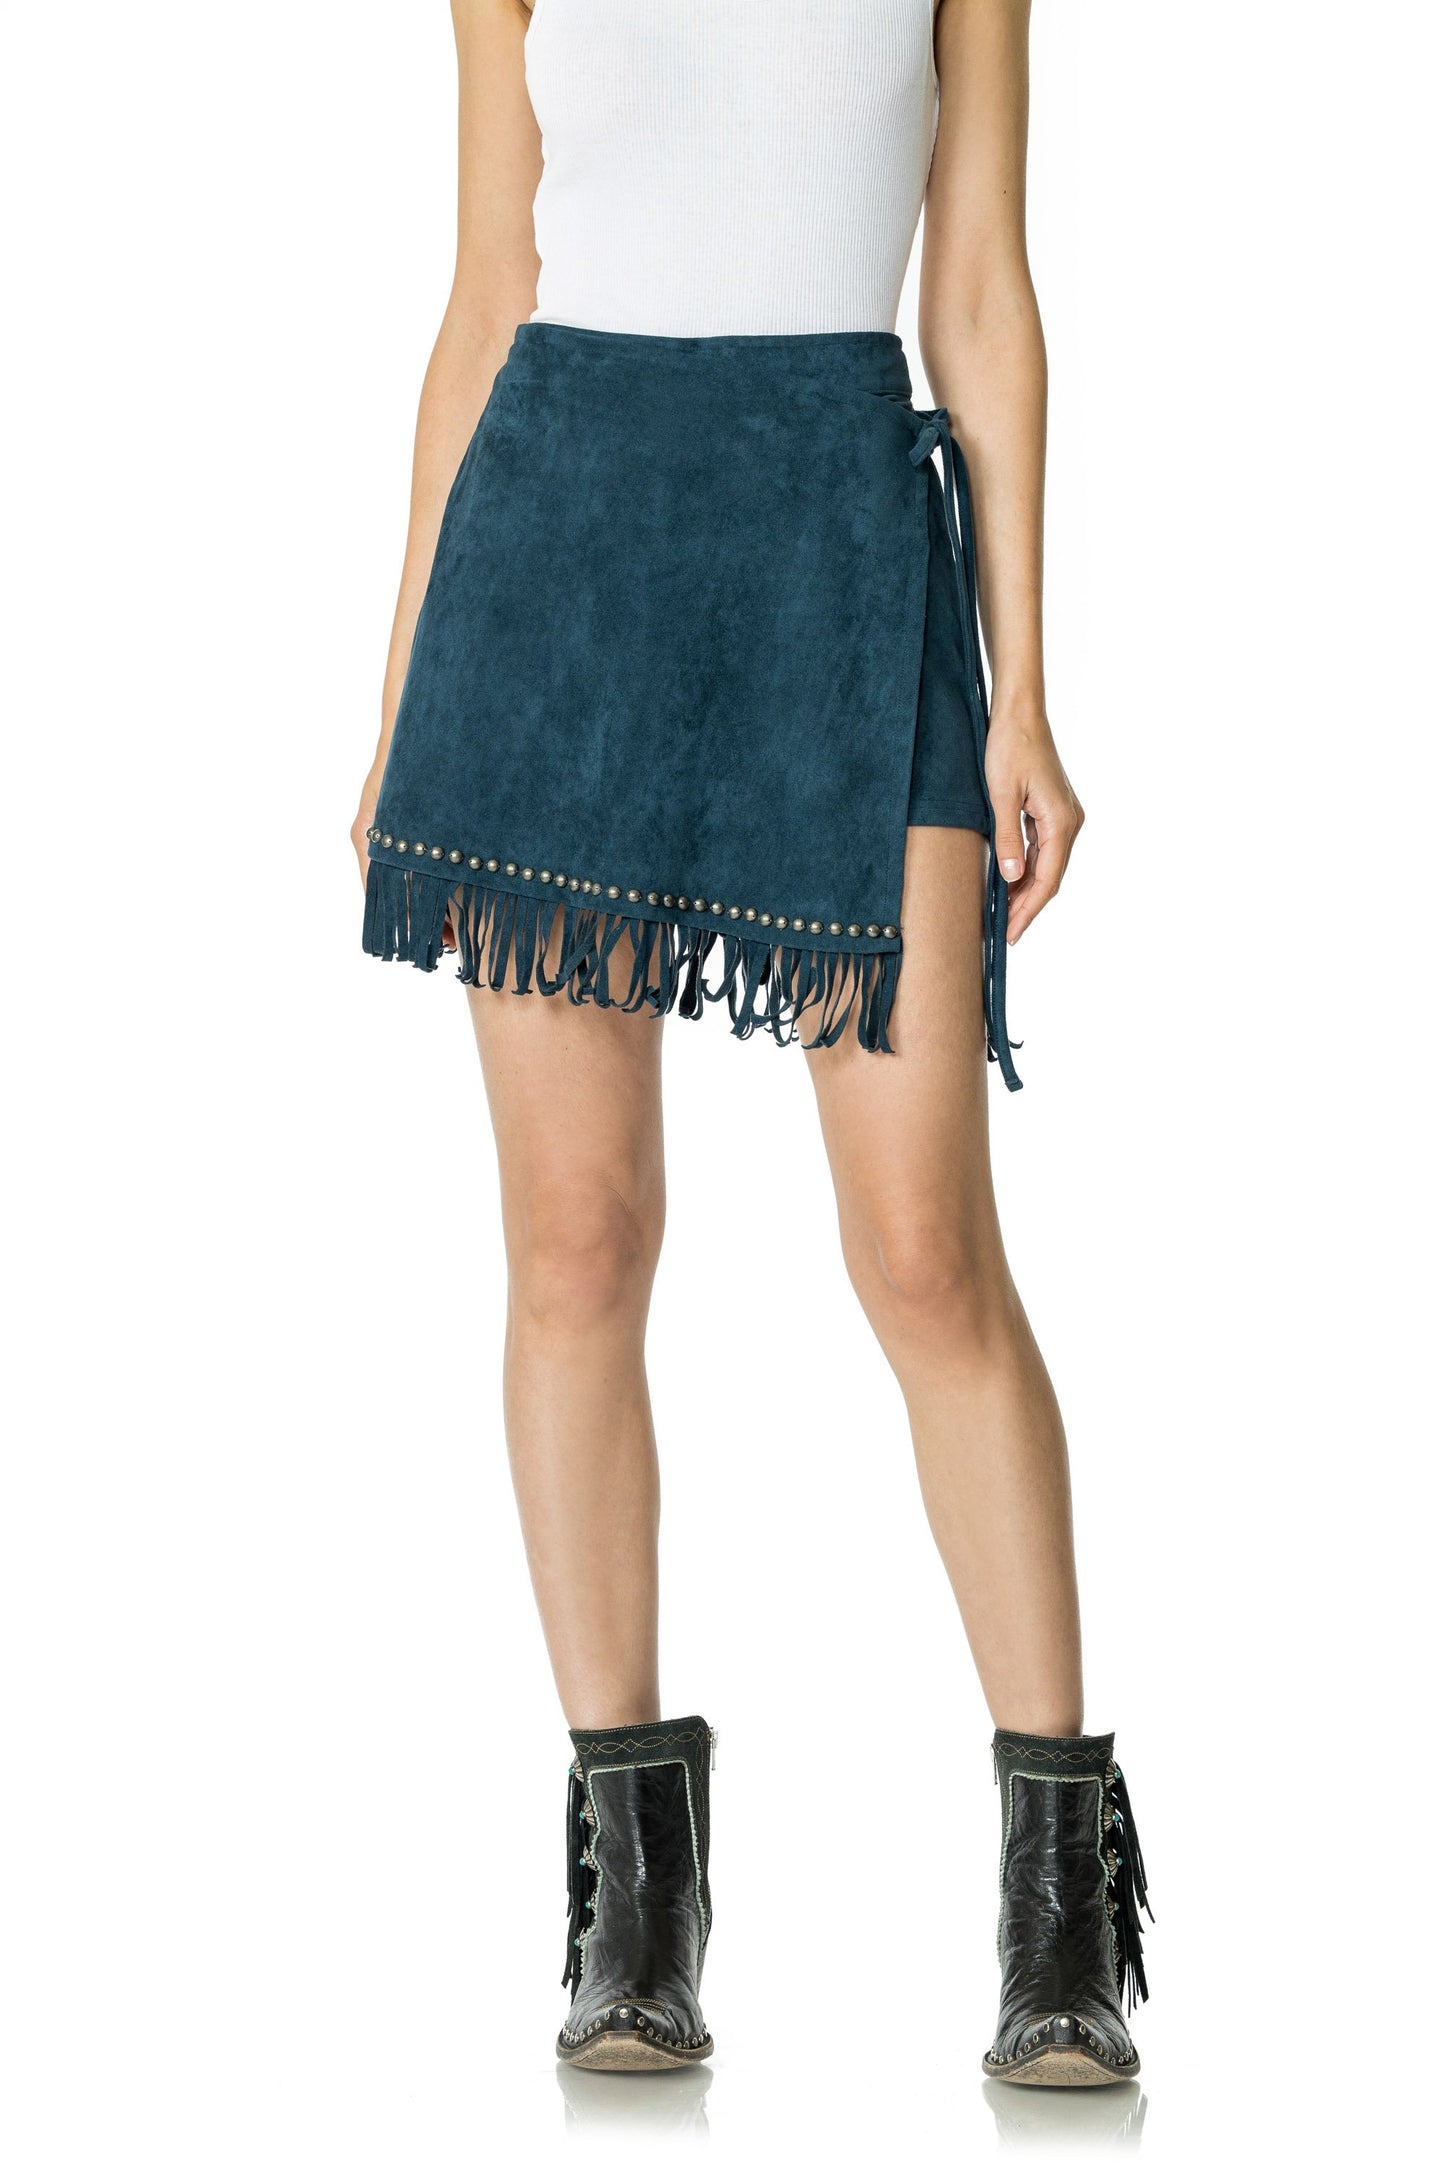 Double D Ranch - Signs Skirt